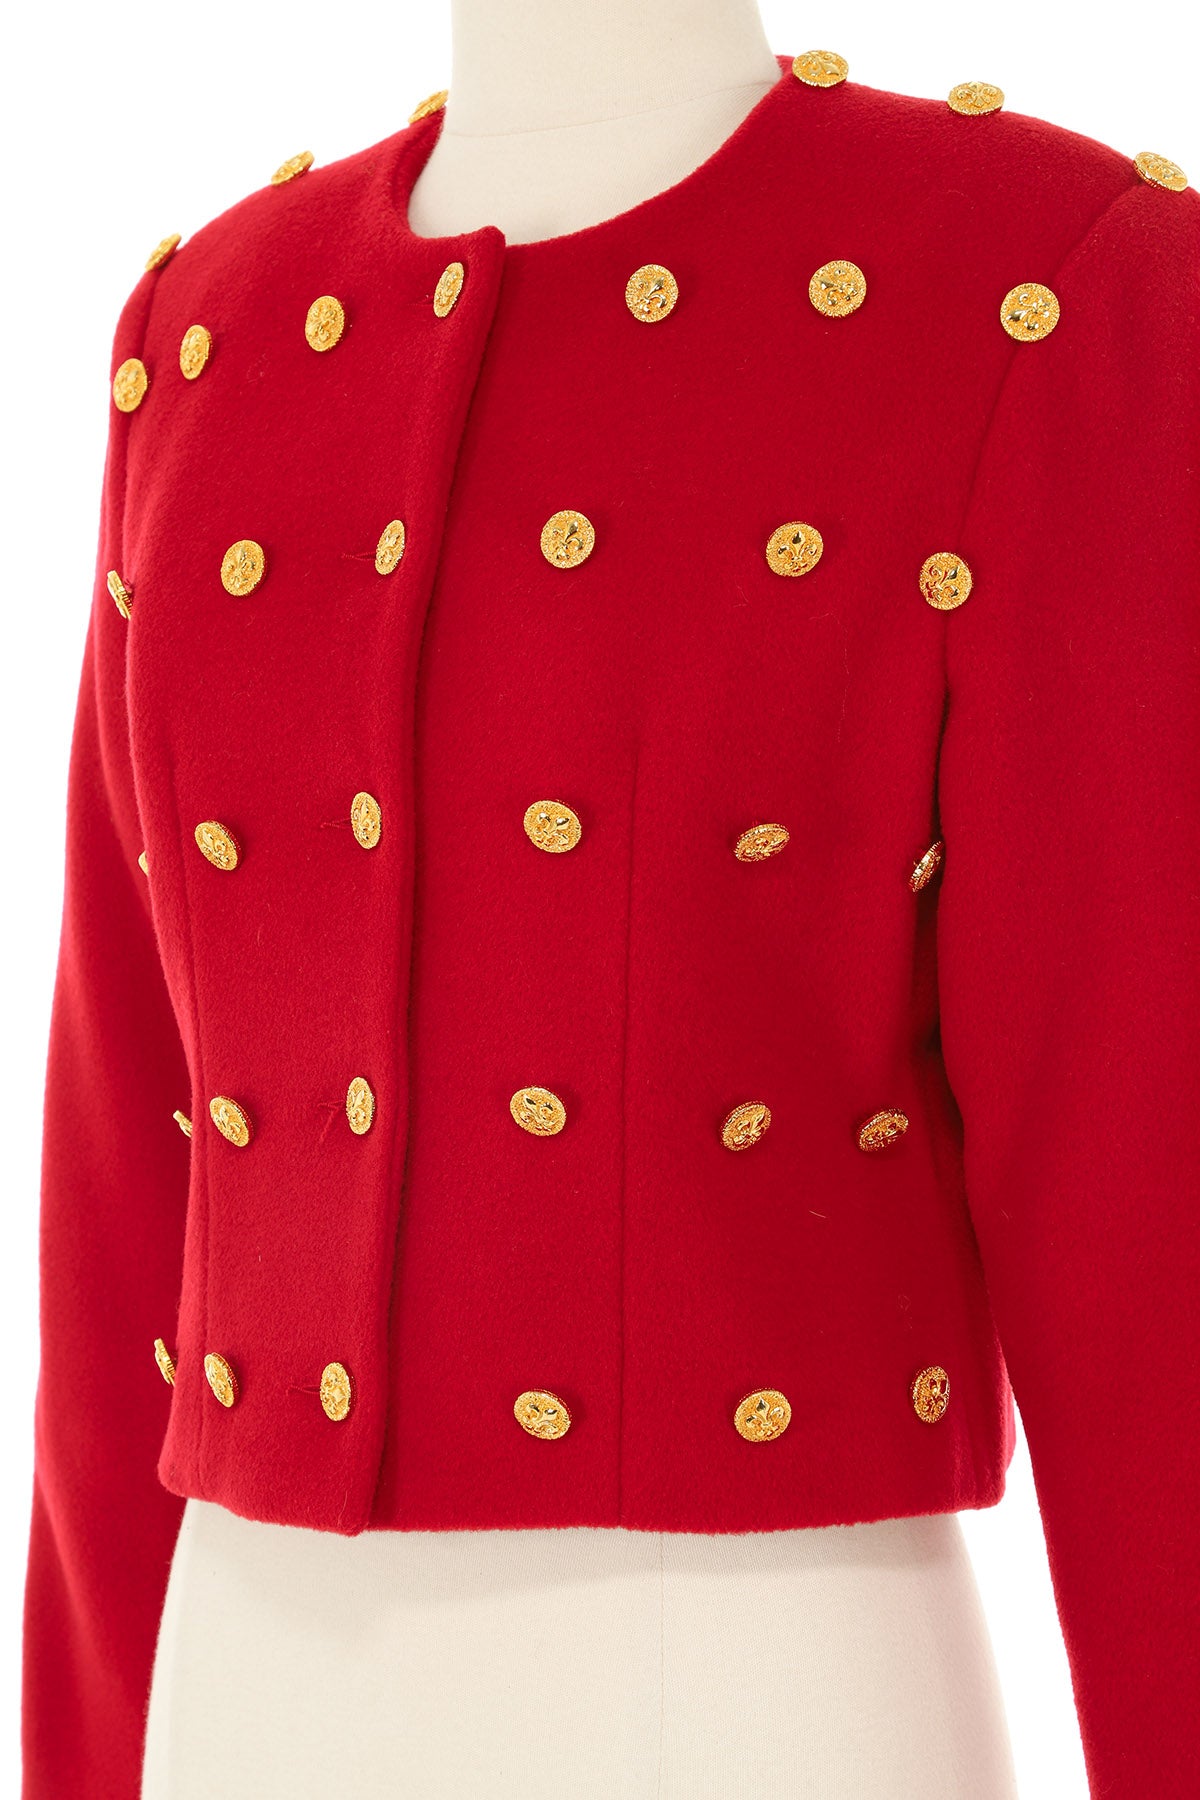 Patrick Kelly 1980s Jacket with Gold Buttons